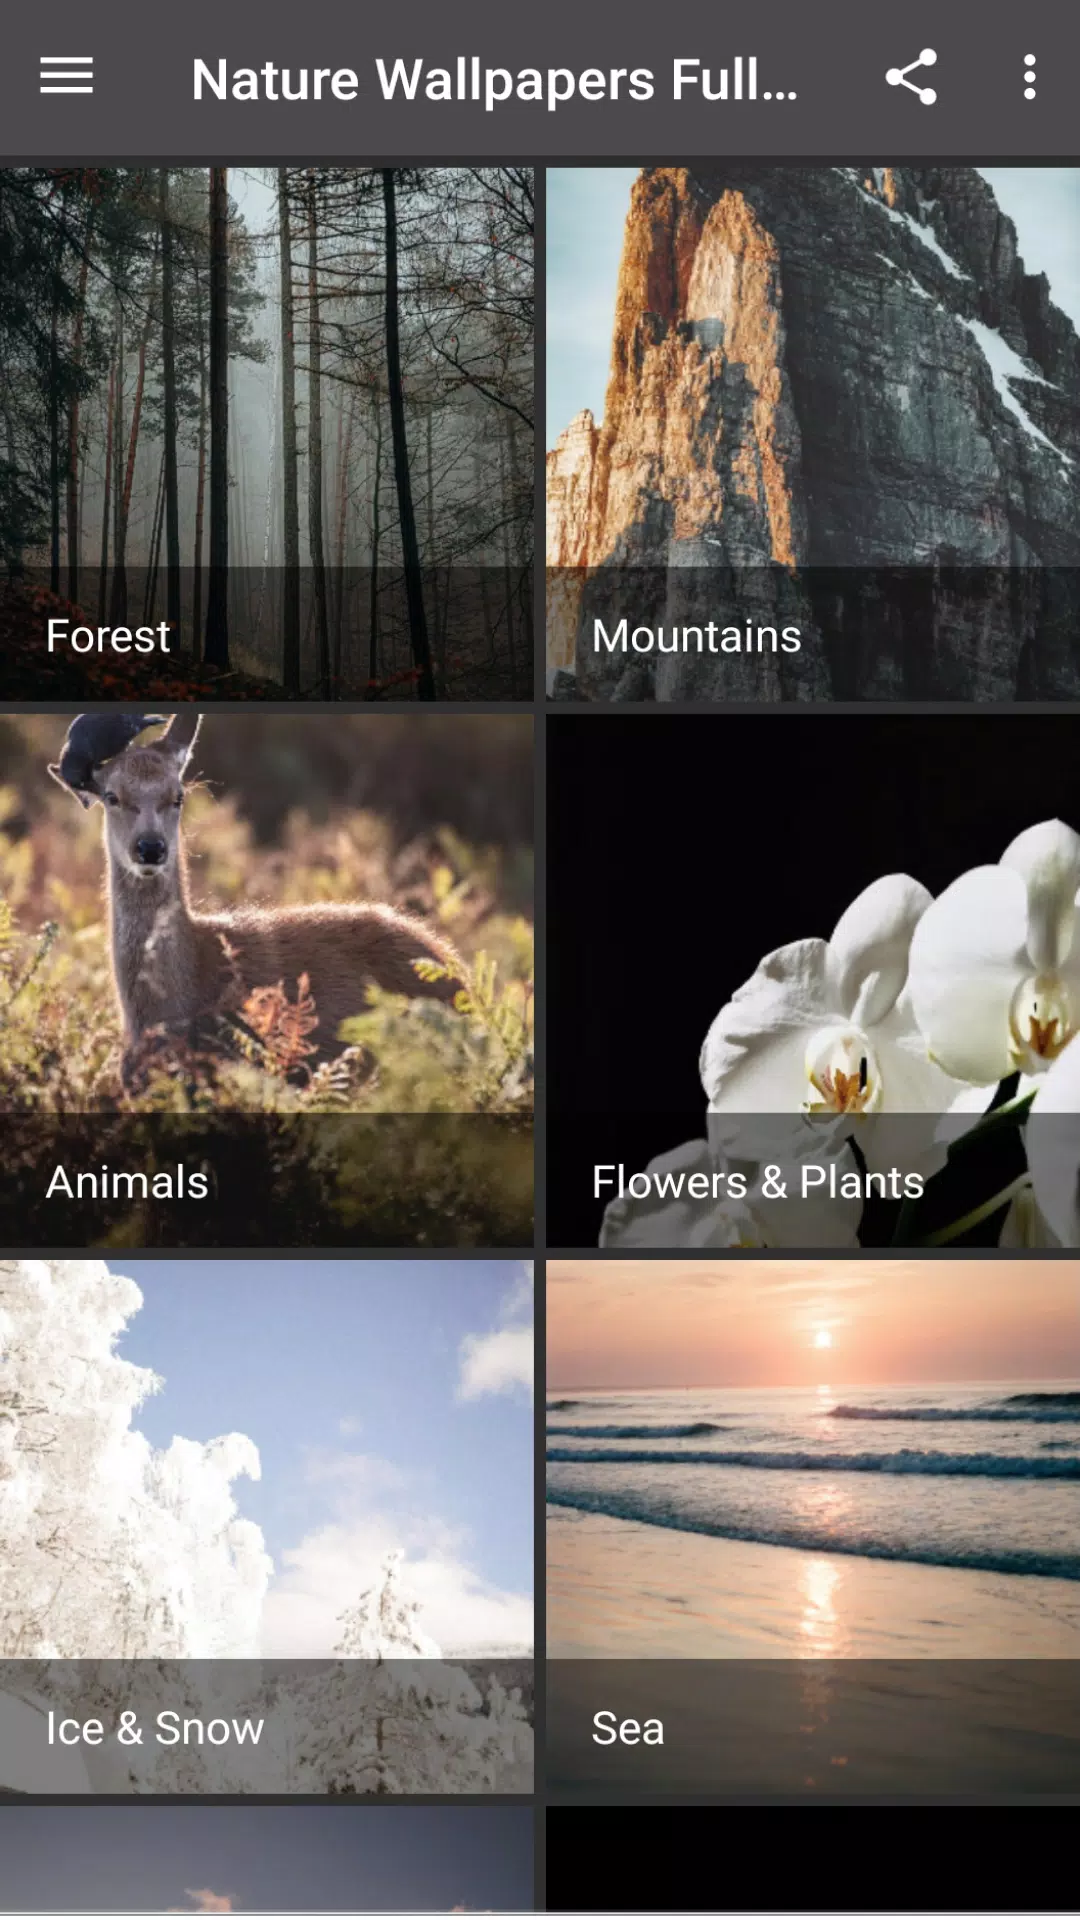 A collage of nature photos including deer, flowers, mountains, and the ocean. - Nature